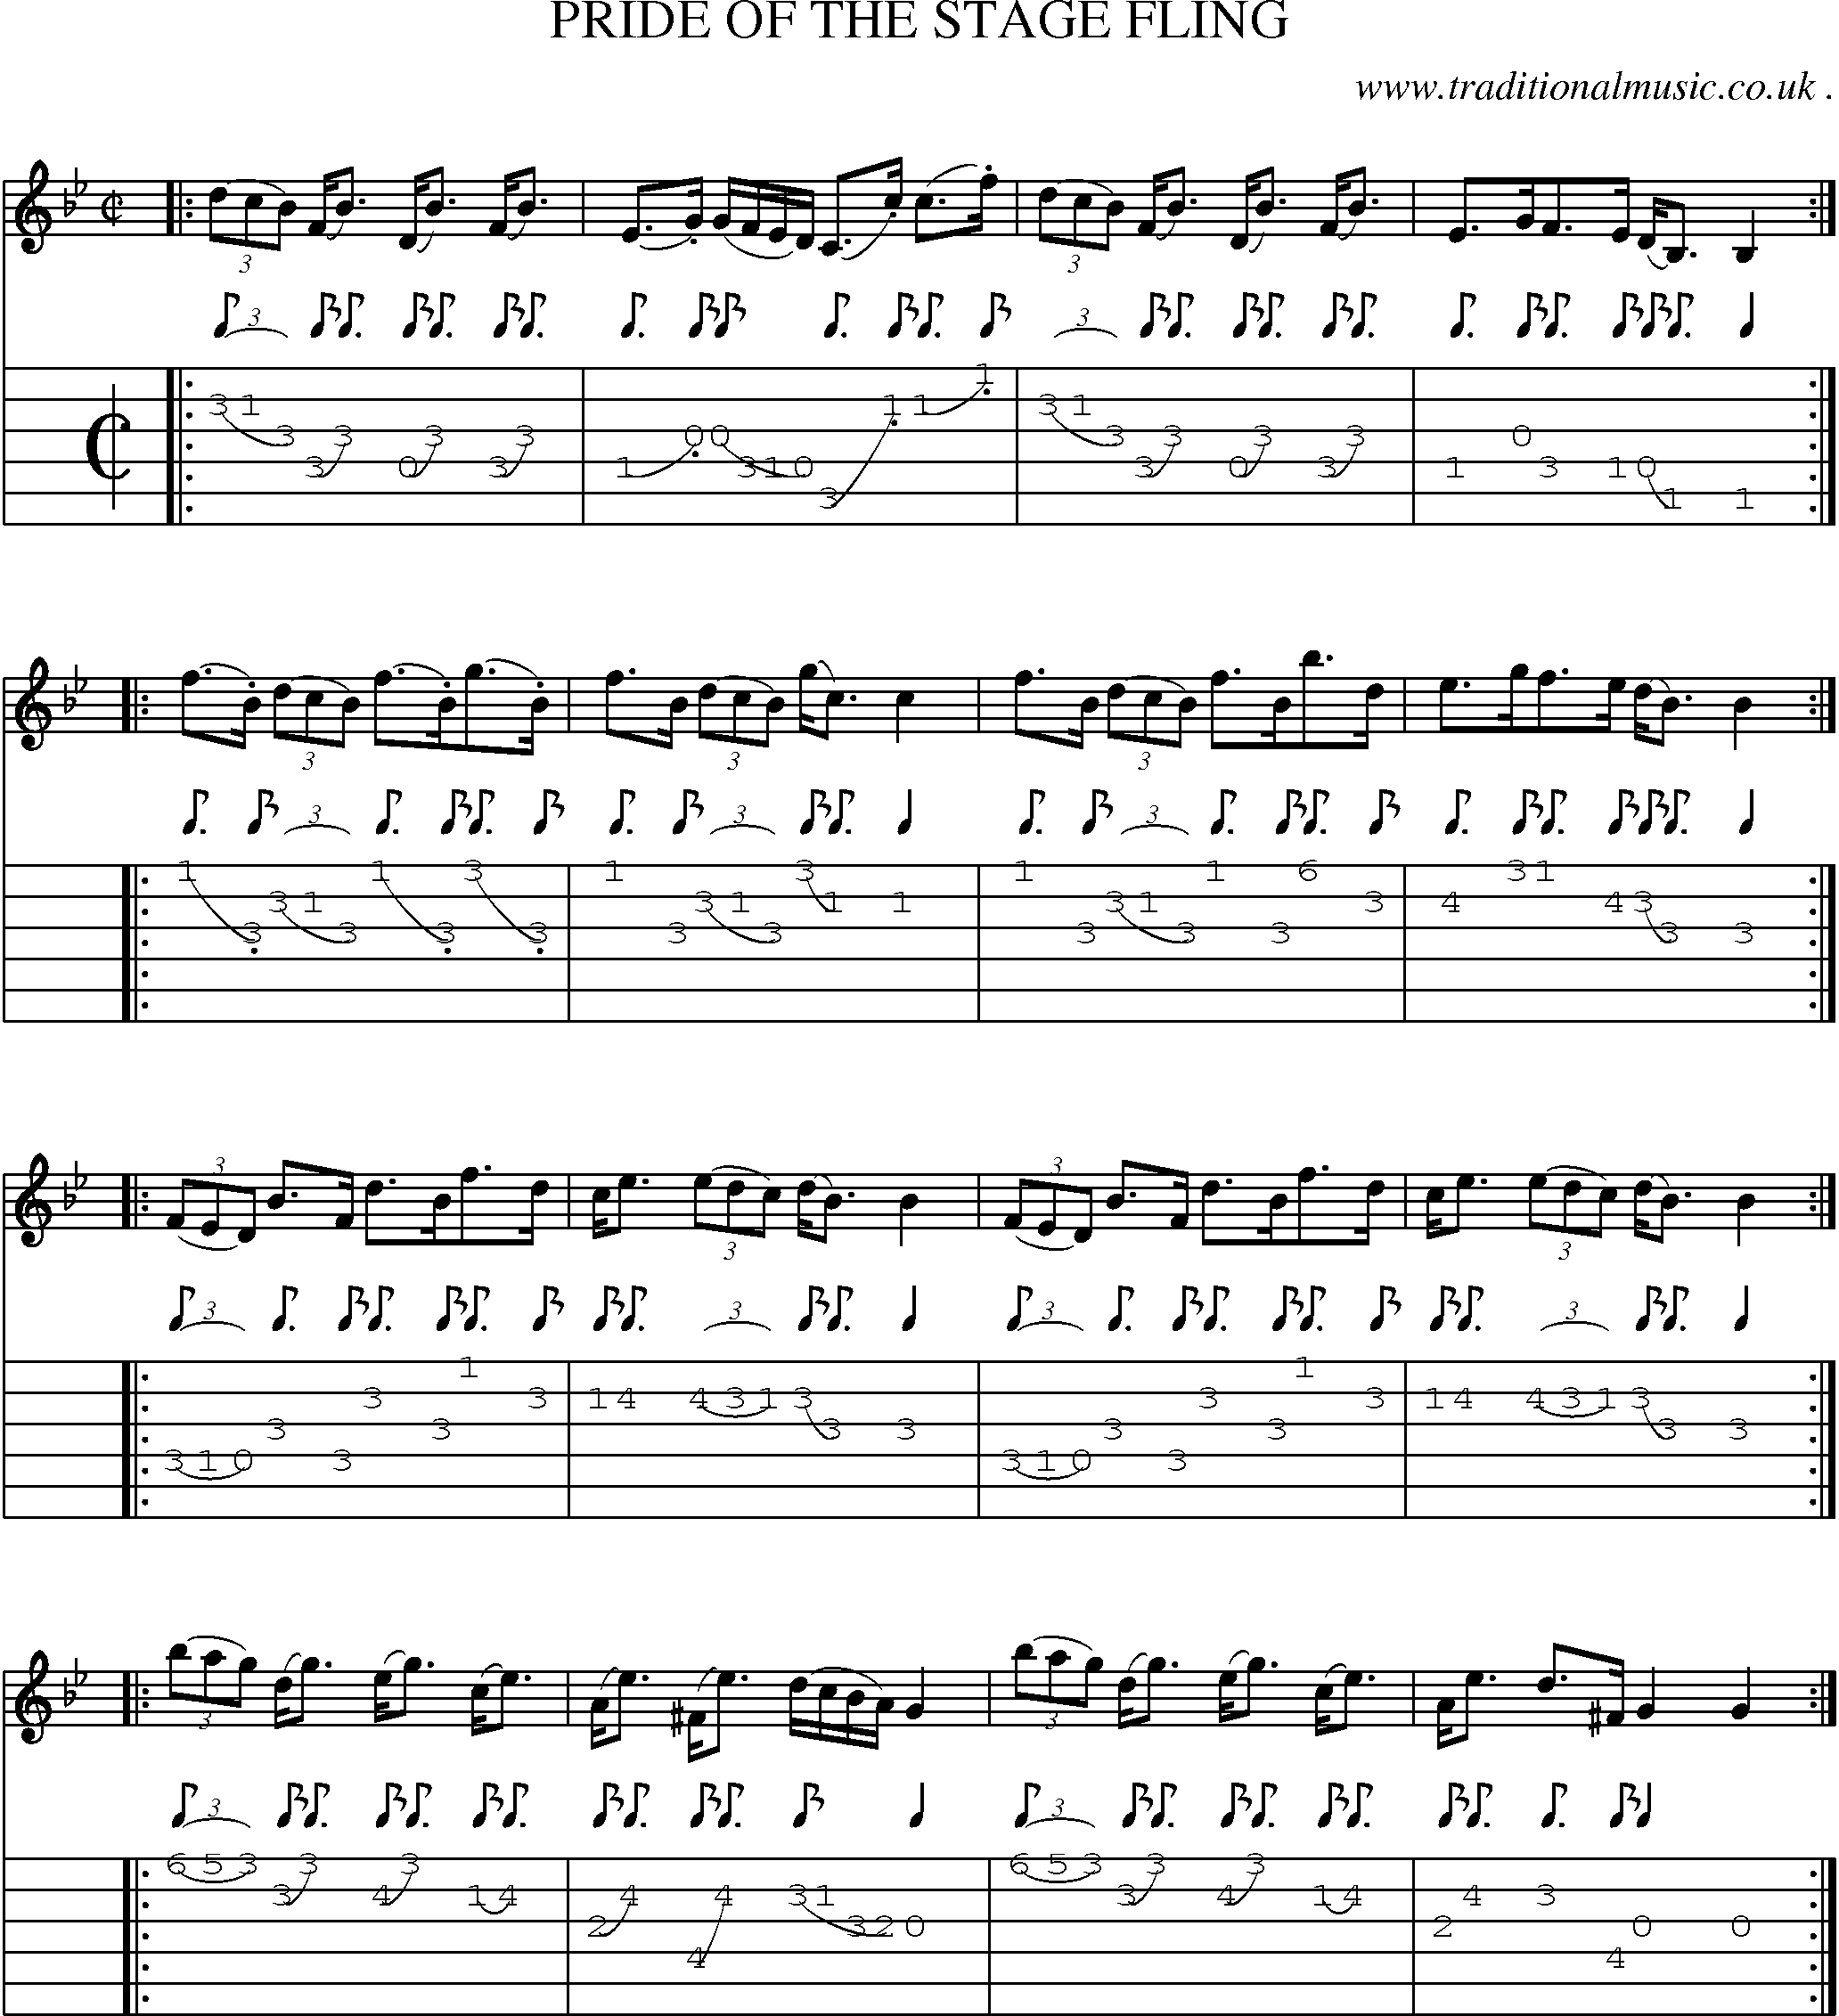 Sheet-Music and Guitar Tabs for Pride Of The Stage Fling